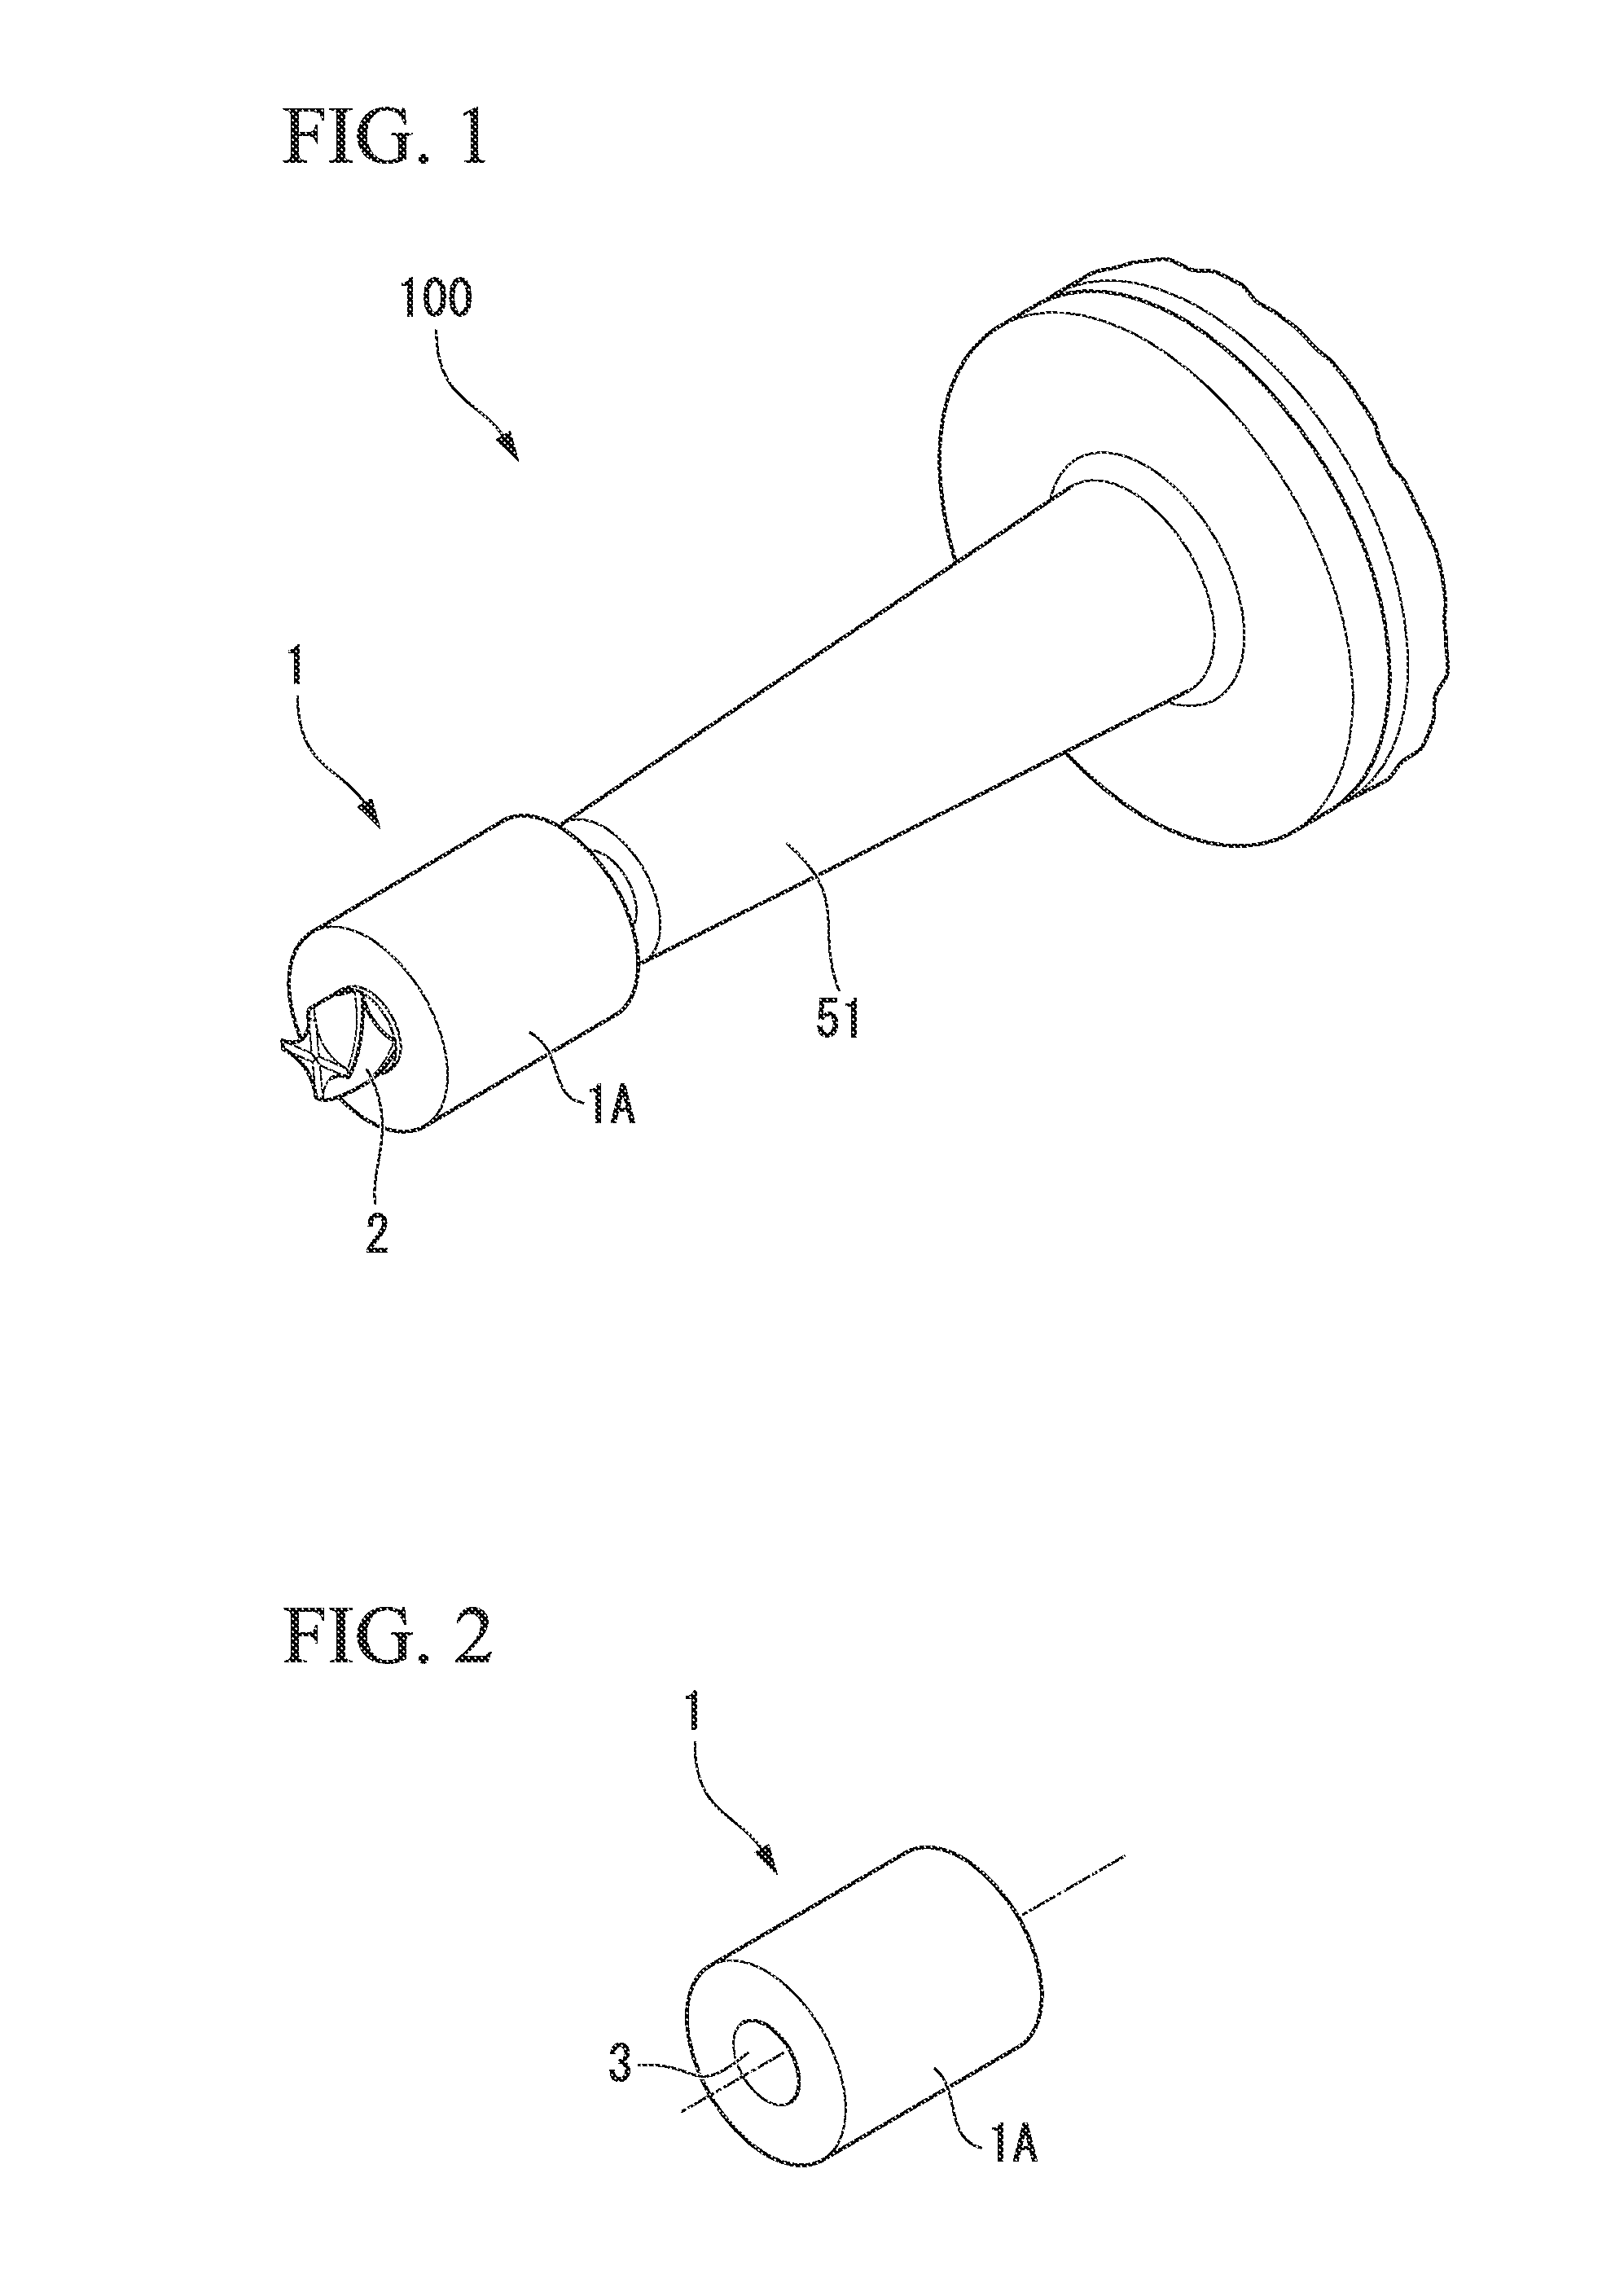 Anti-vibration member and cutting tool